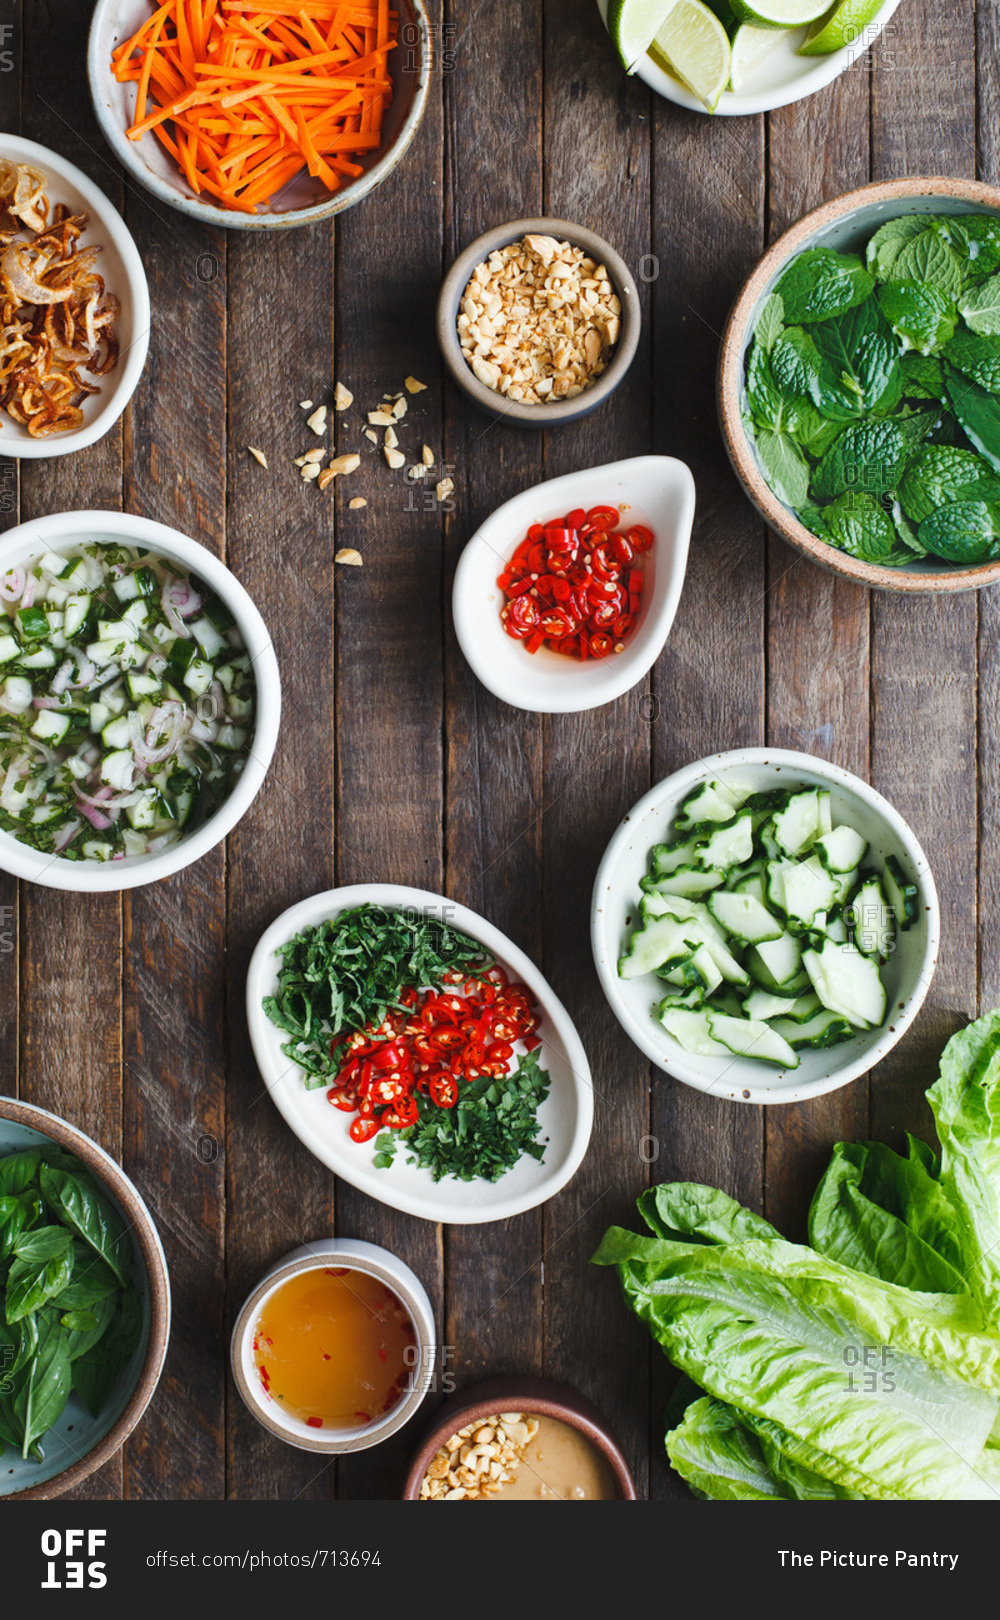 Lettuce cup ingredients in bowls on wood background